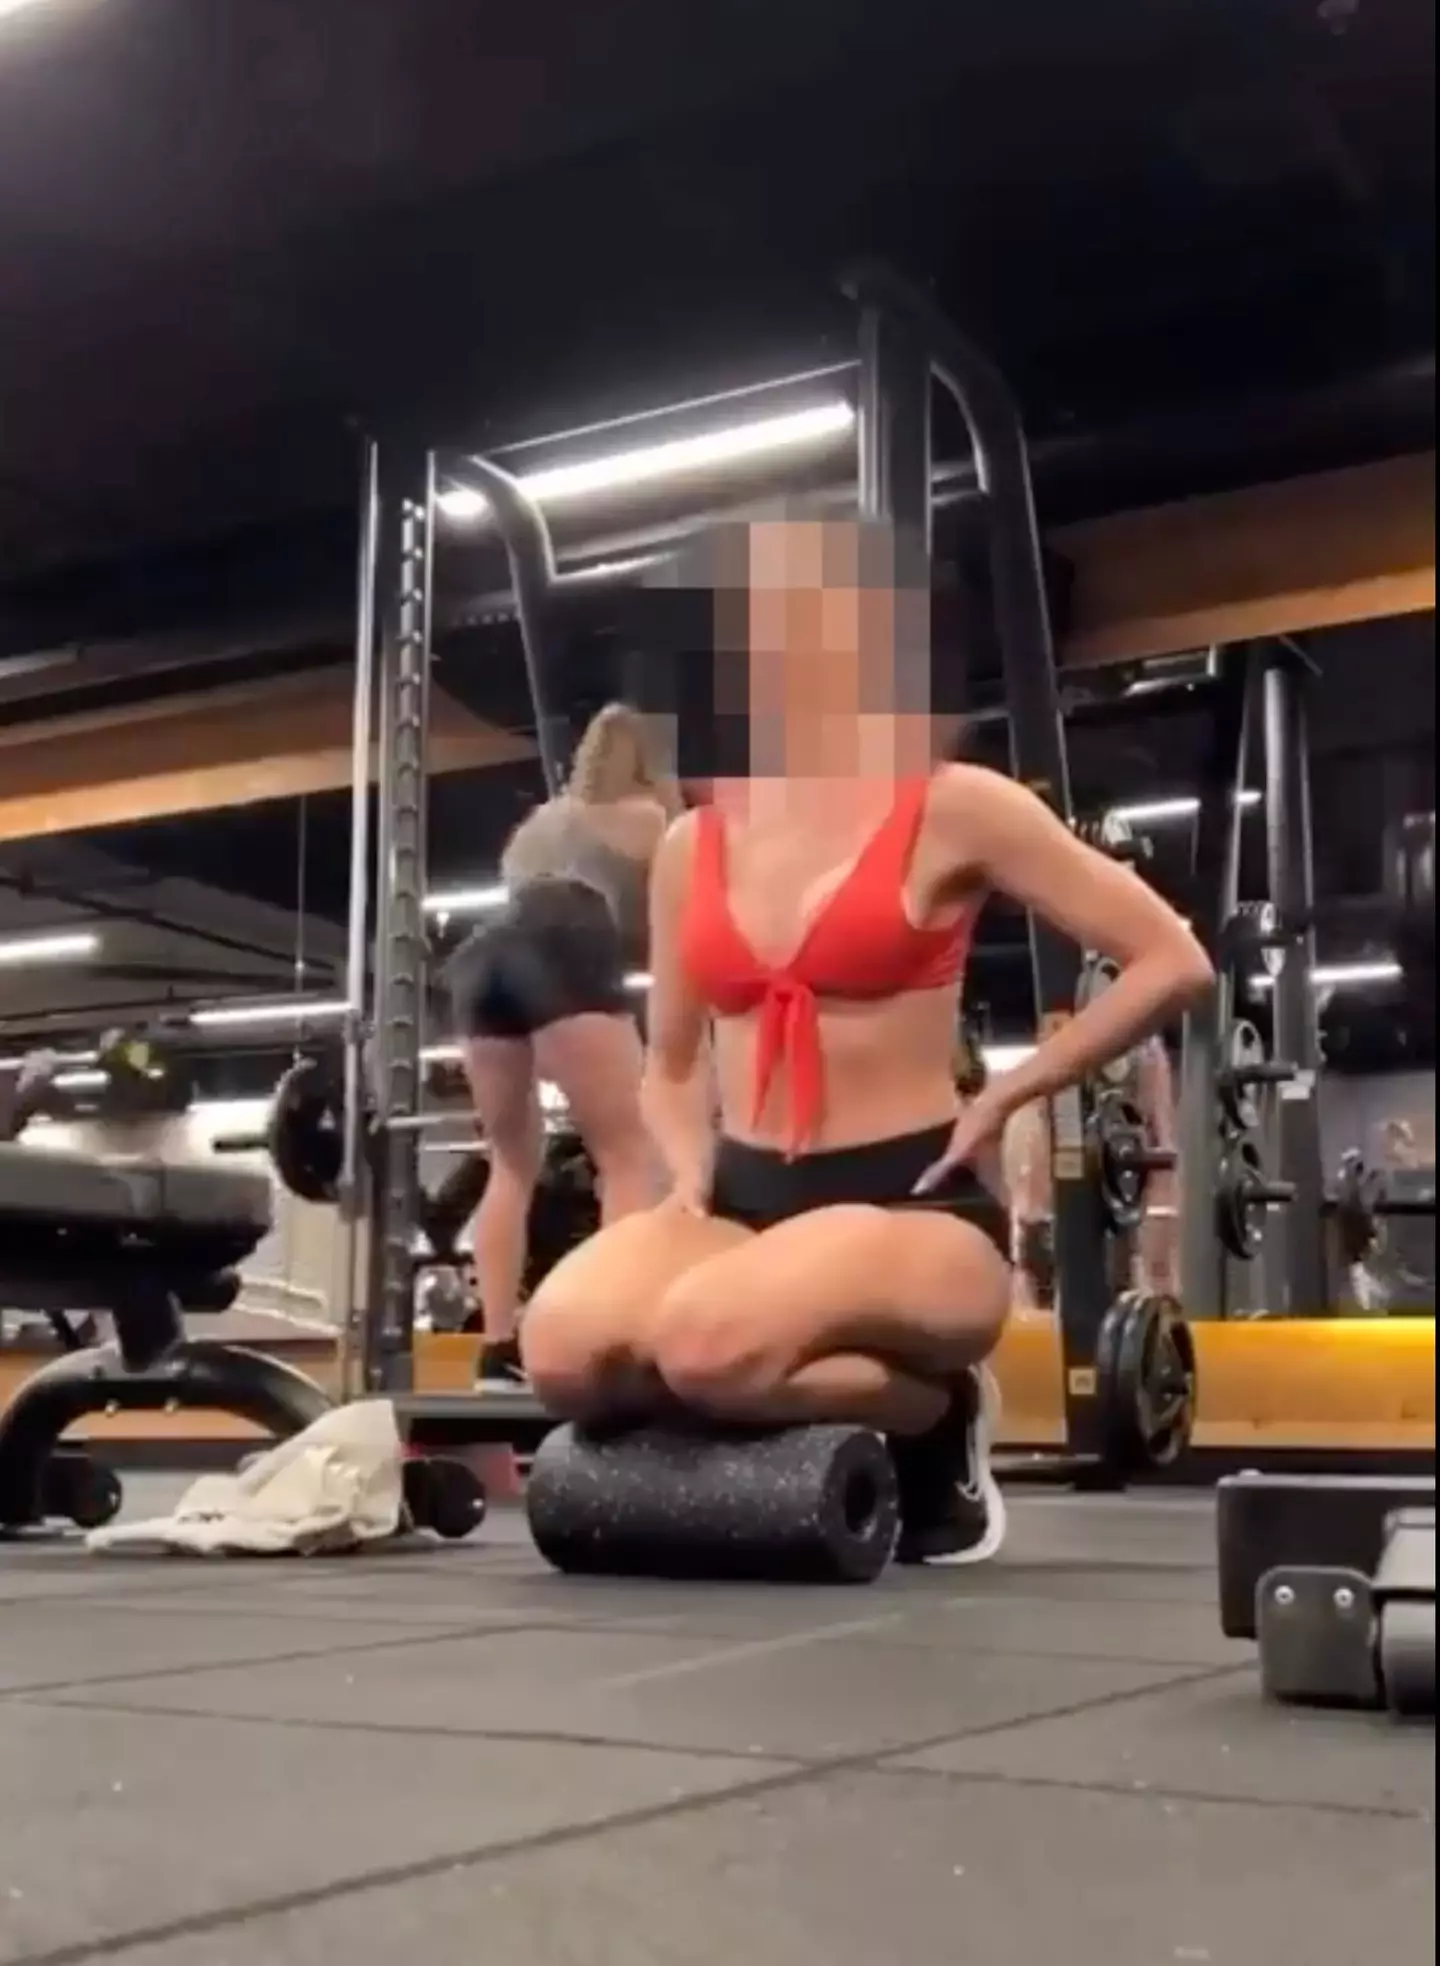 The streamer shared a video sarcastically commenting on another woman's gym outfit to try and bolster her defence.